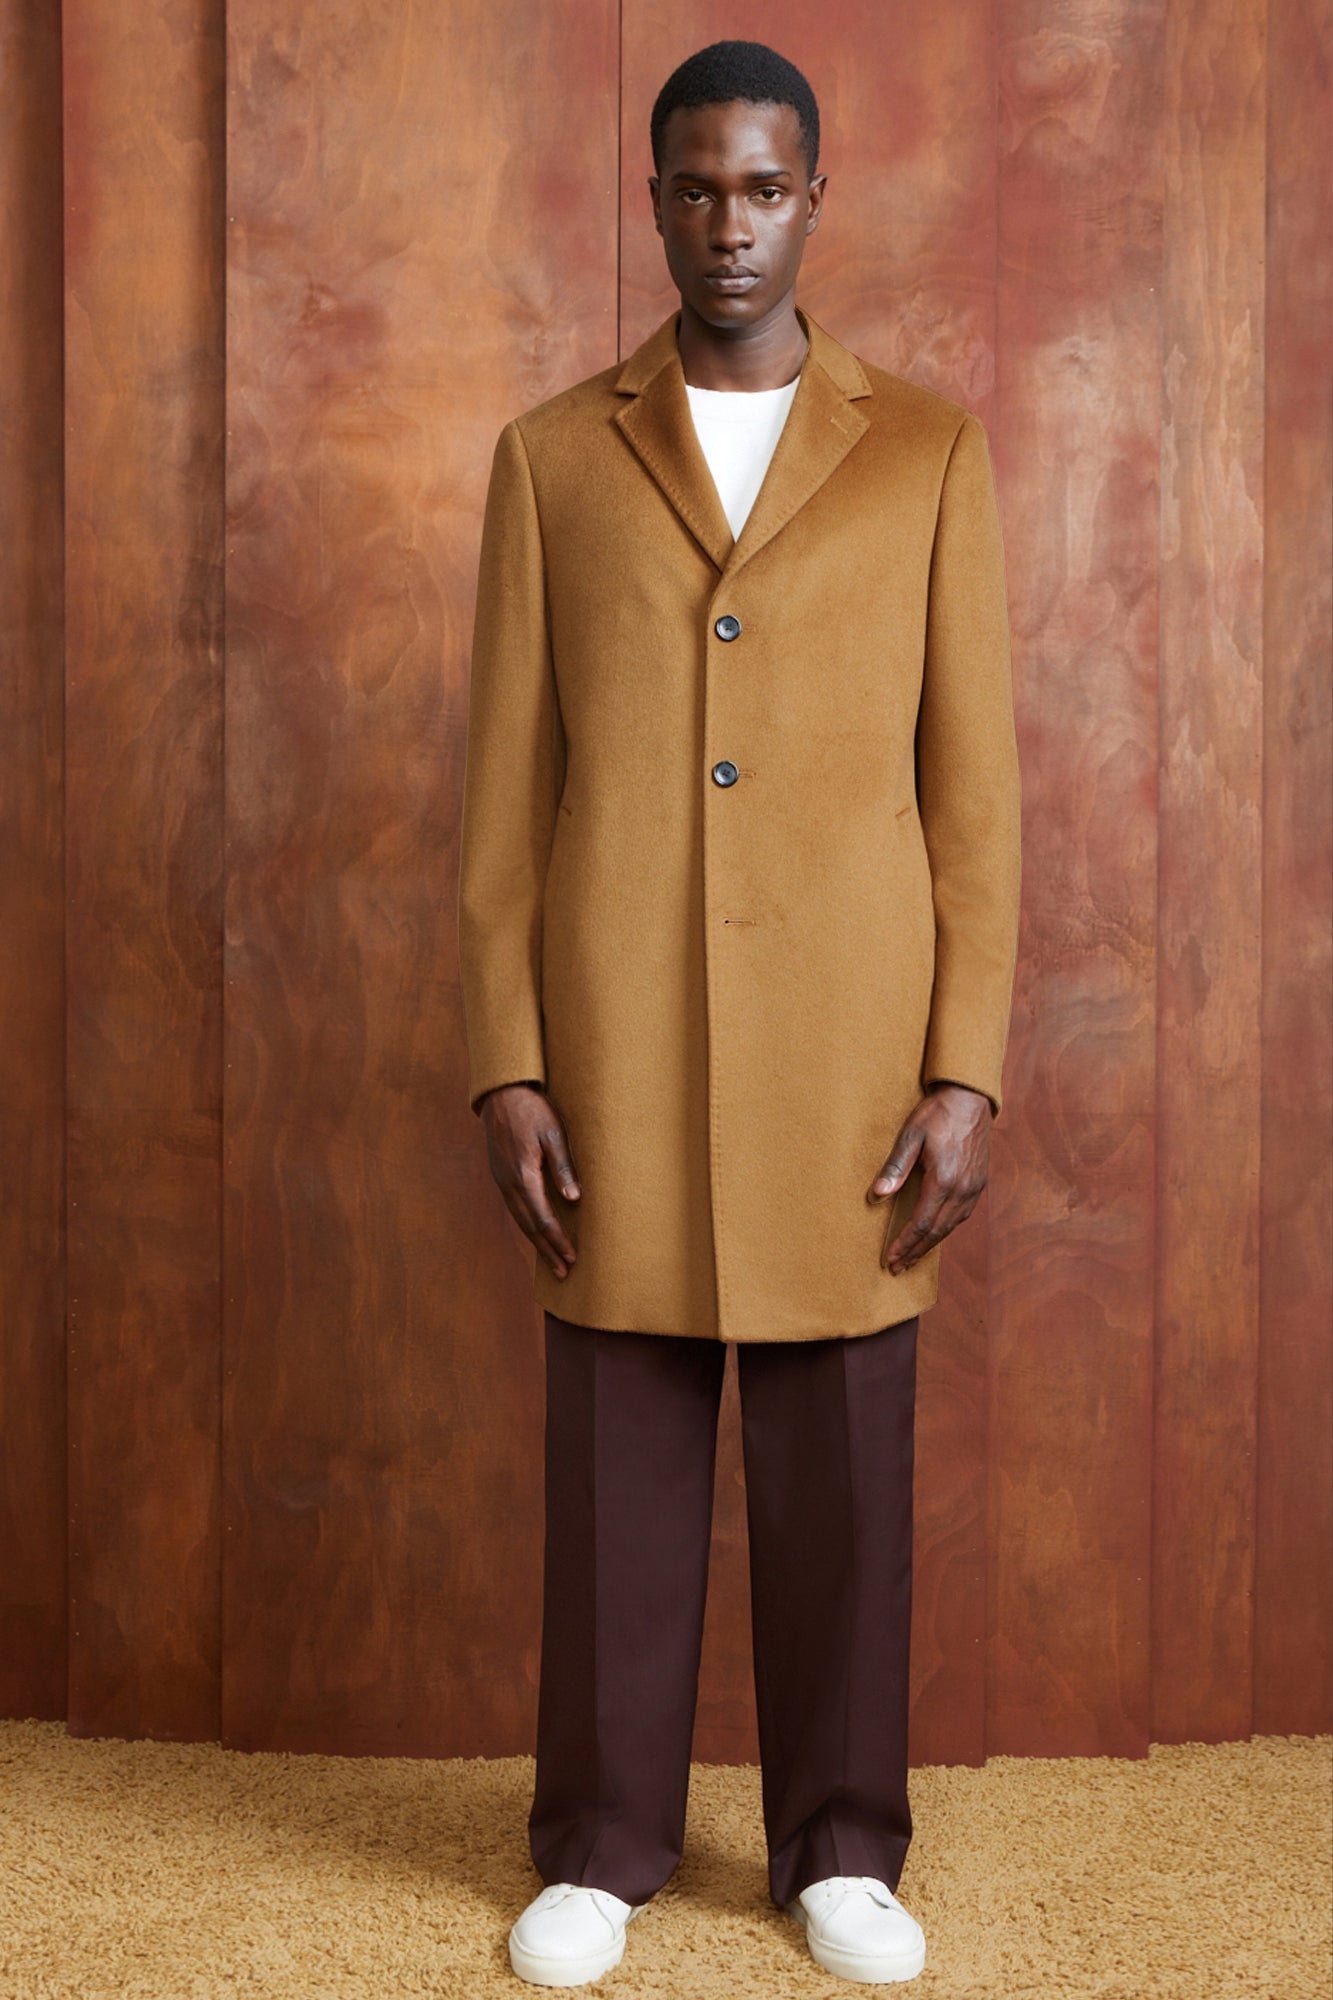 ST-PIERRE VICUNA CASHMERE OVERCOAT - Cardinal of Canada-US-ST-PIERRE VICUNA CASHMERE TOPCOAT